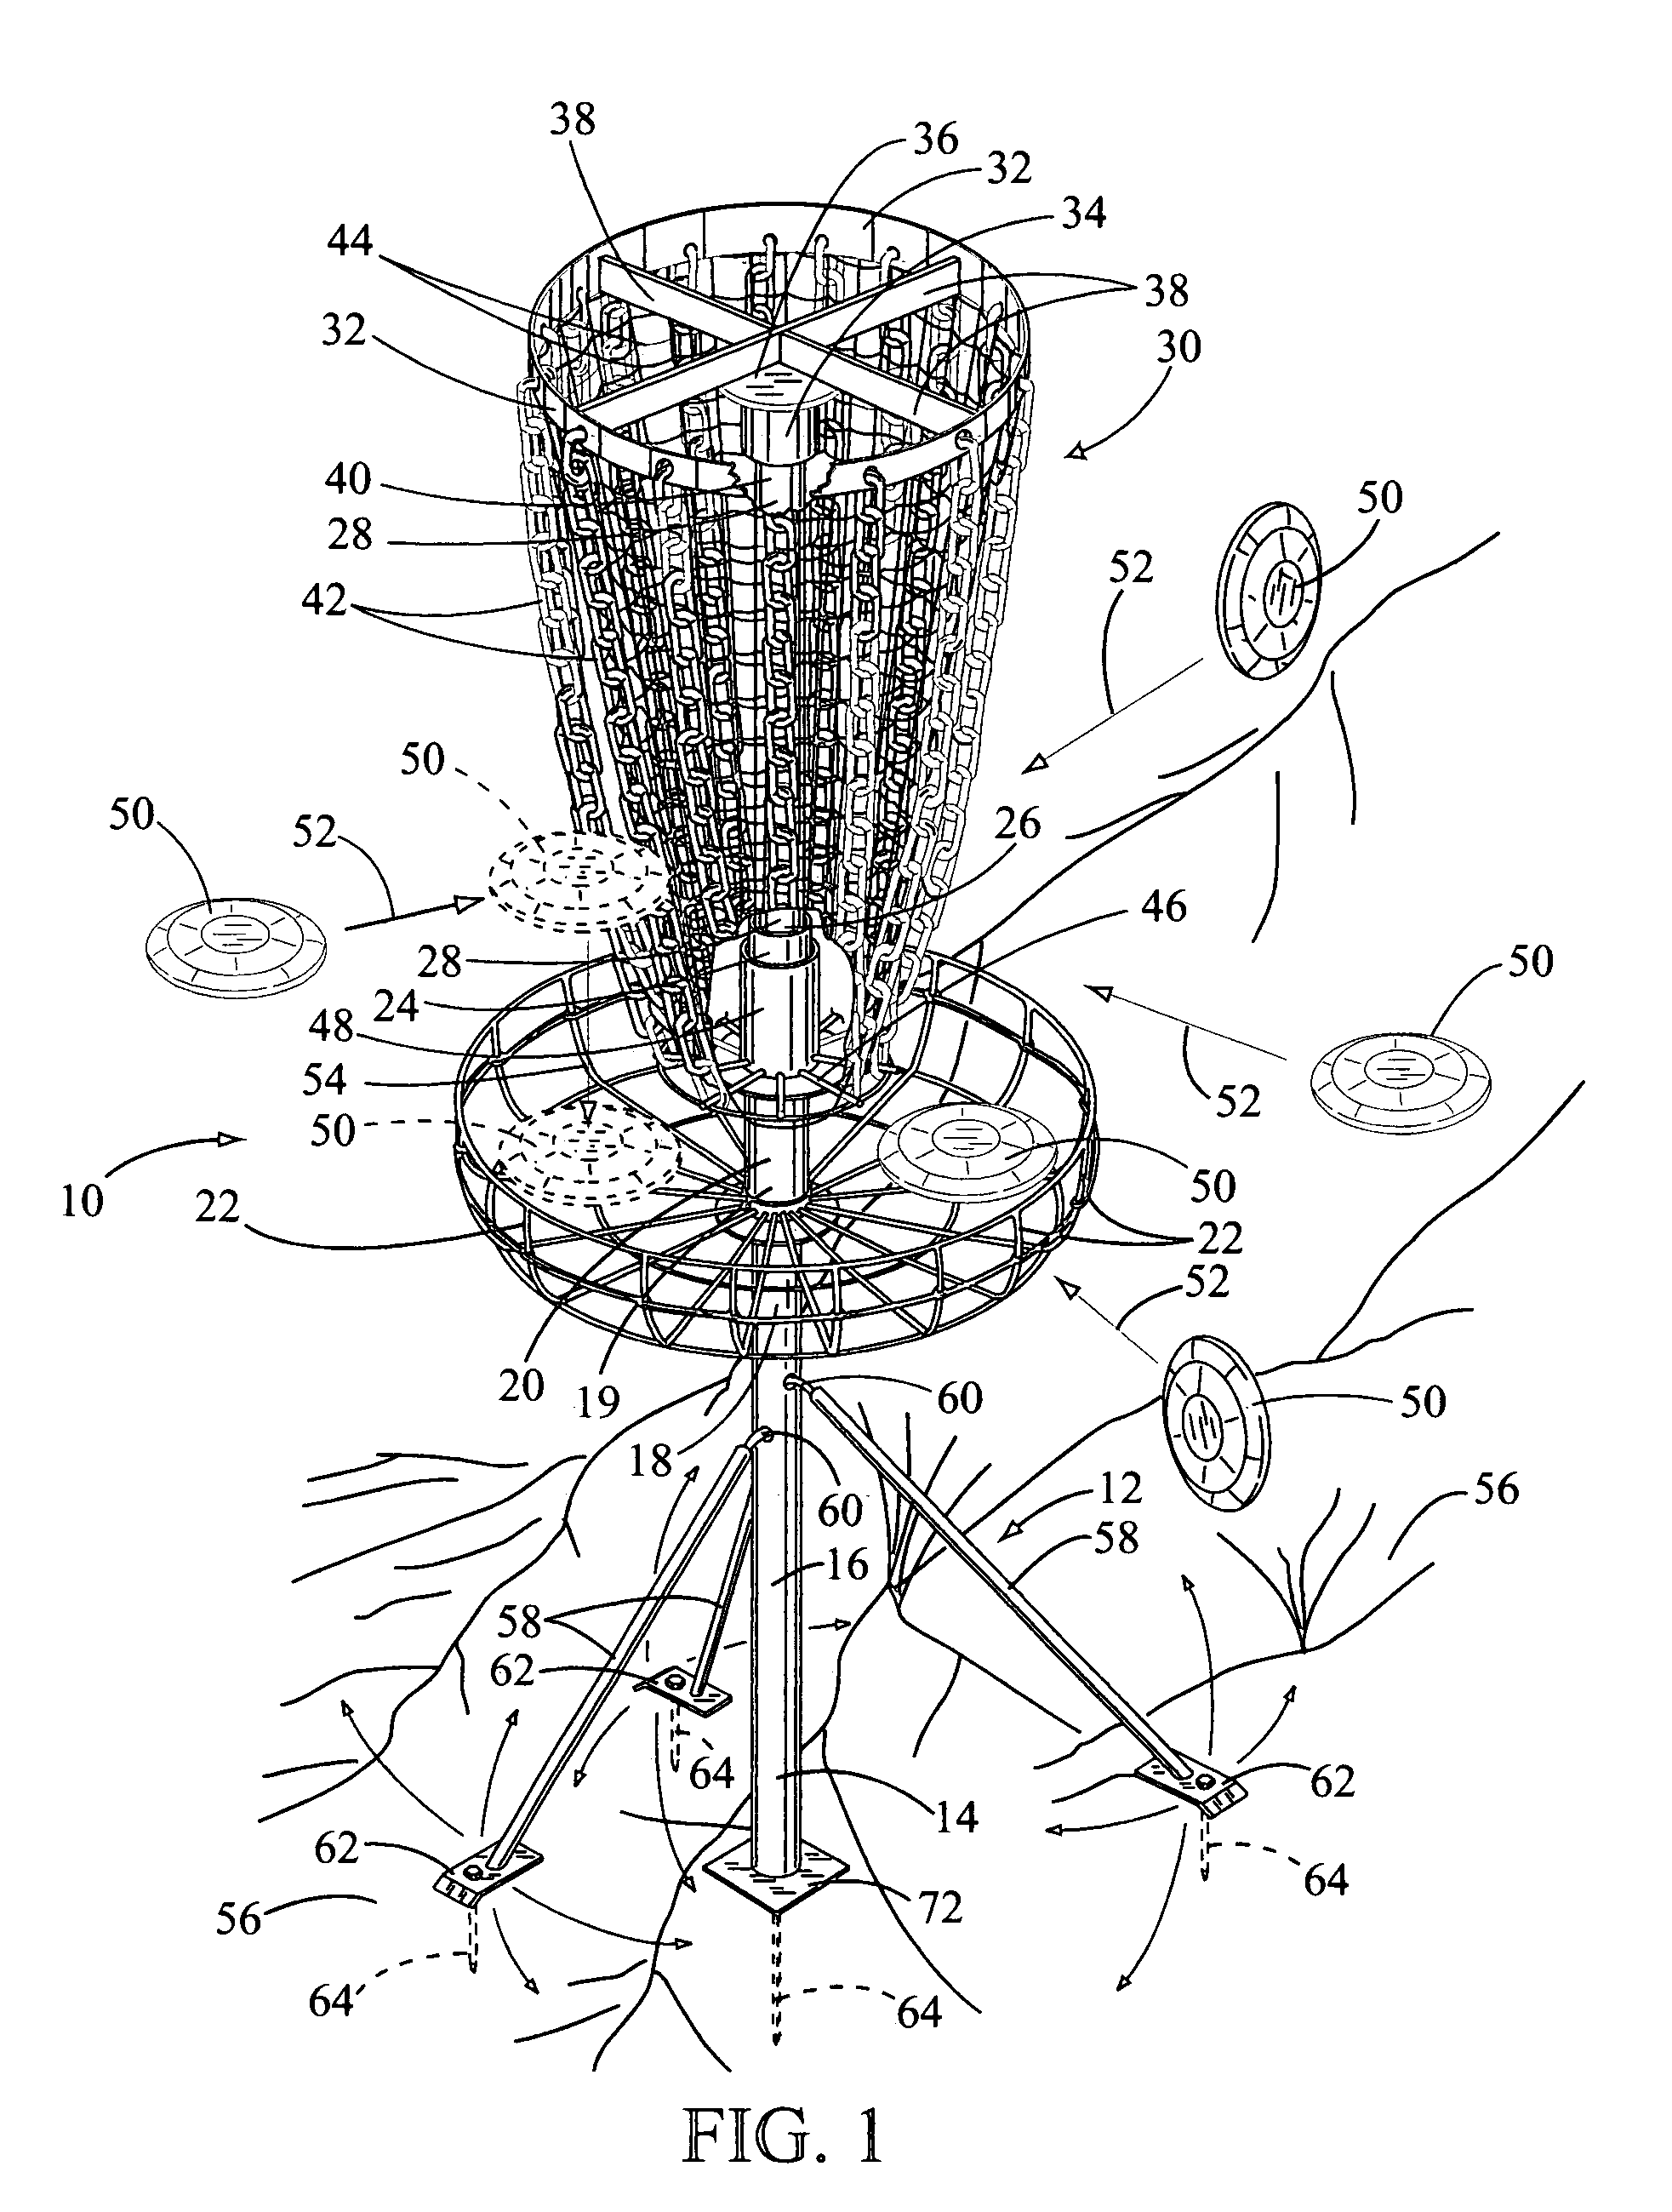 Flying disk target assembly for engaging and catching flying disk